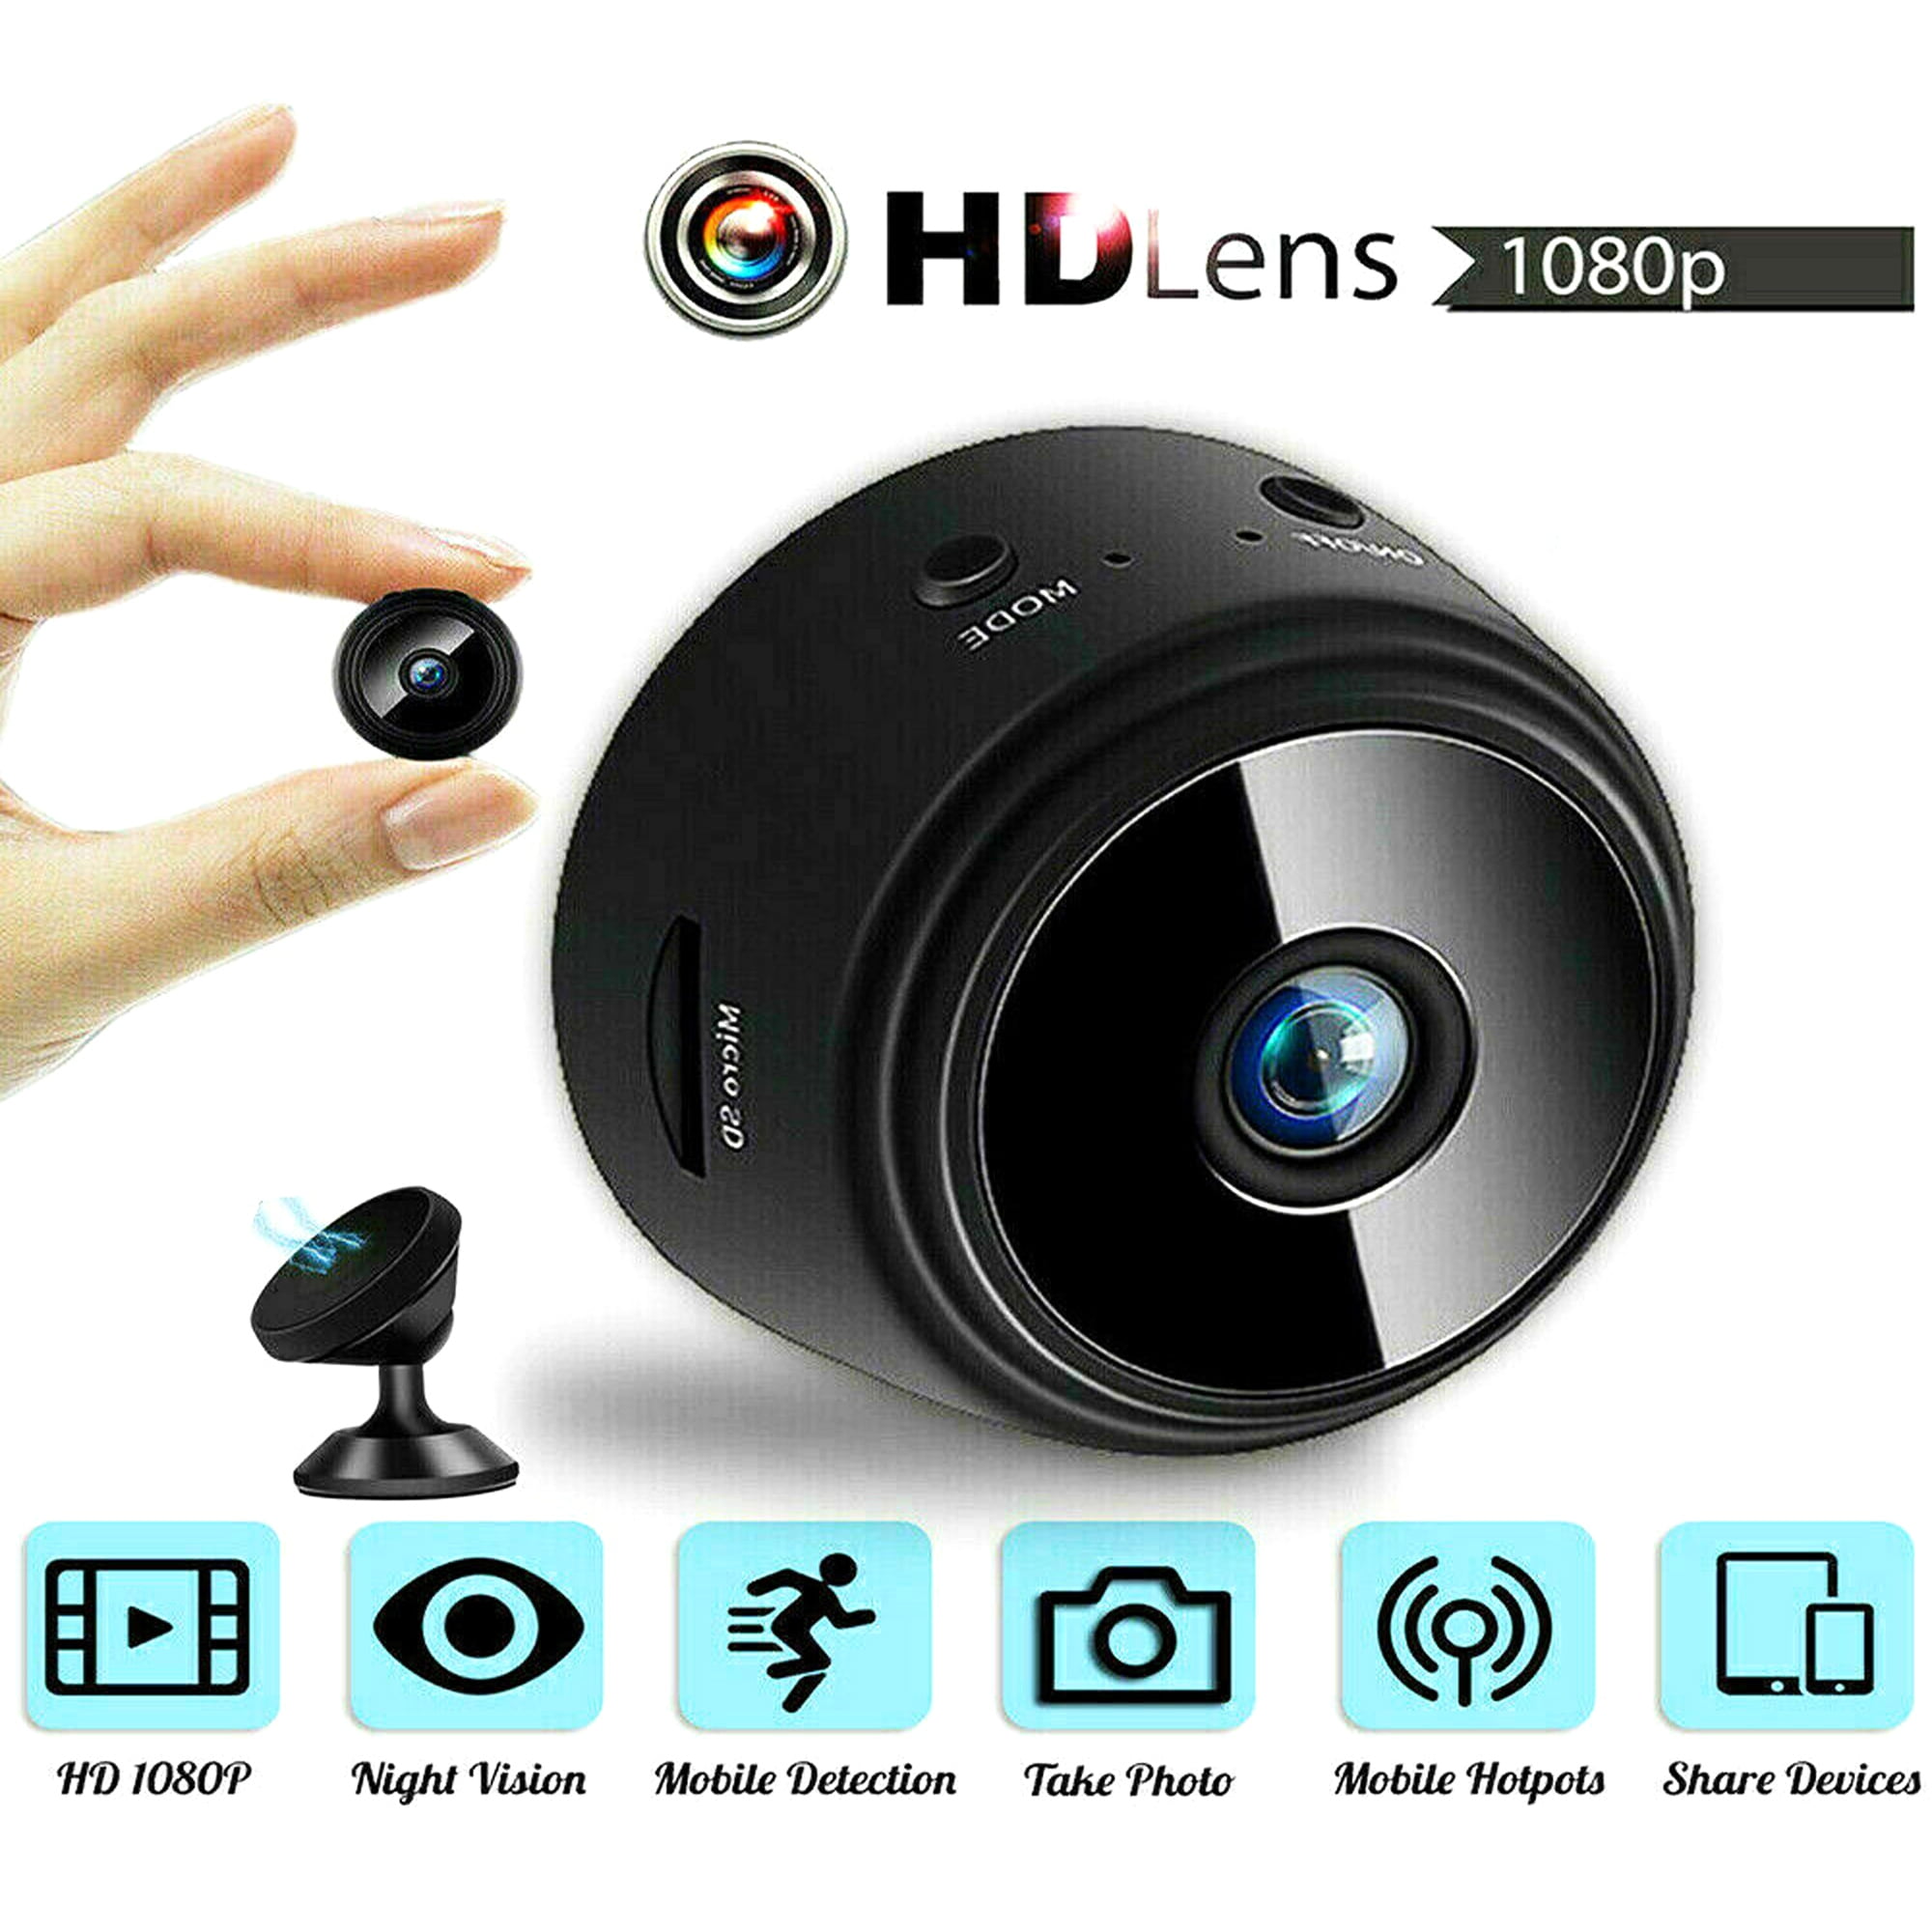 IP Camera,Wireless Home Security 720P HD WiFi Camera with Night Vision US Plug Email Alarm Mini Hidden Spy Camera for for Surveillance Baby/Elder/Pet/Nanny Motion Detection 